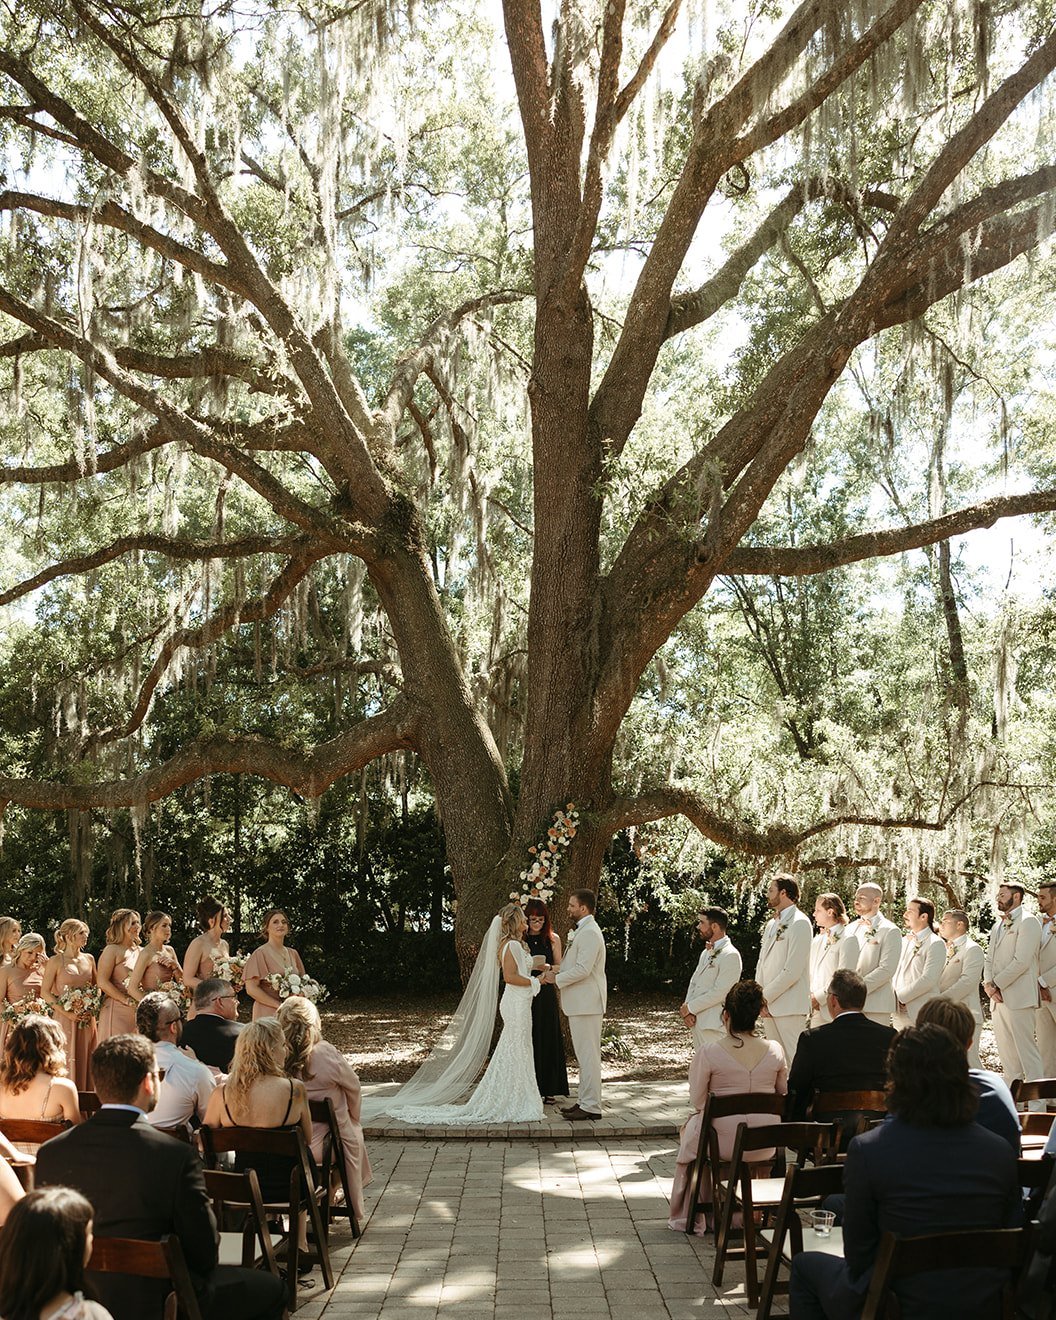 Spring wedding vibes - pastel hues, soft petals, and the promise of forever.

Are you planning a spring 2025 wedding? Message us or visit our website to schedule a tour and discover how Bowing Oaks can be the perfect backdrop for your &quot;I Dos!&qu